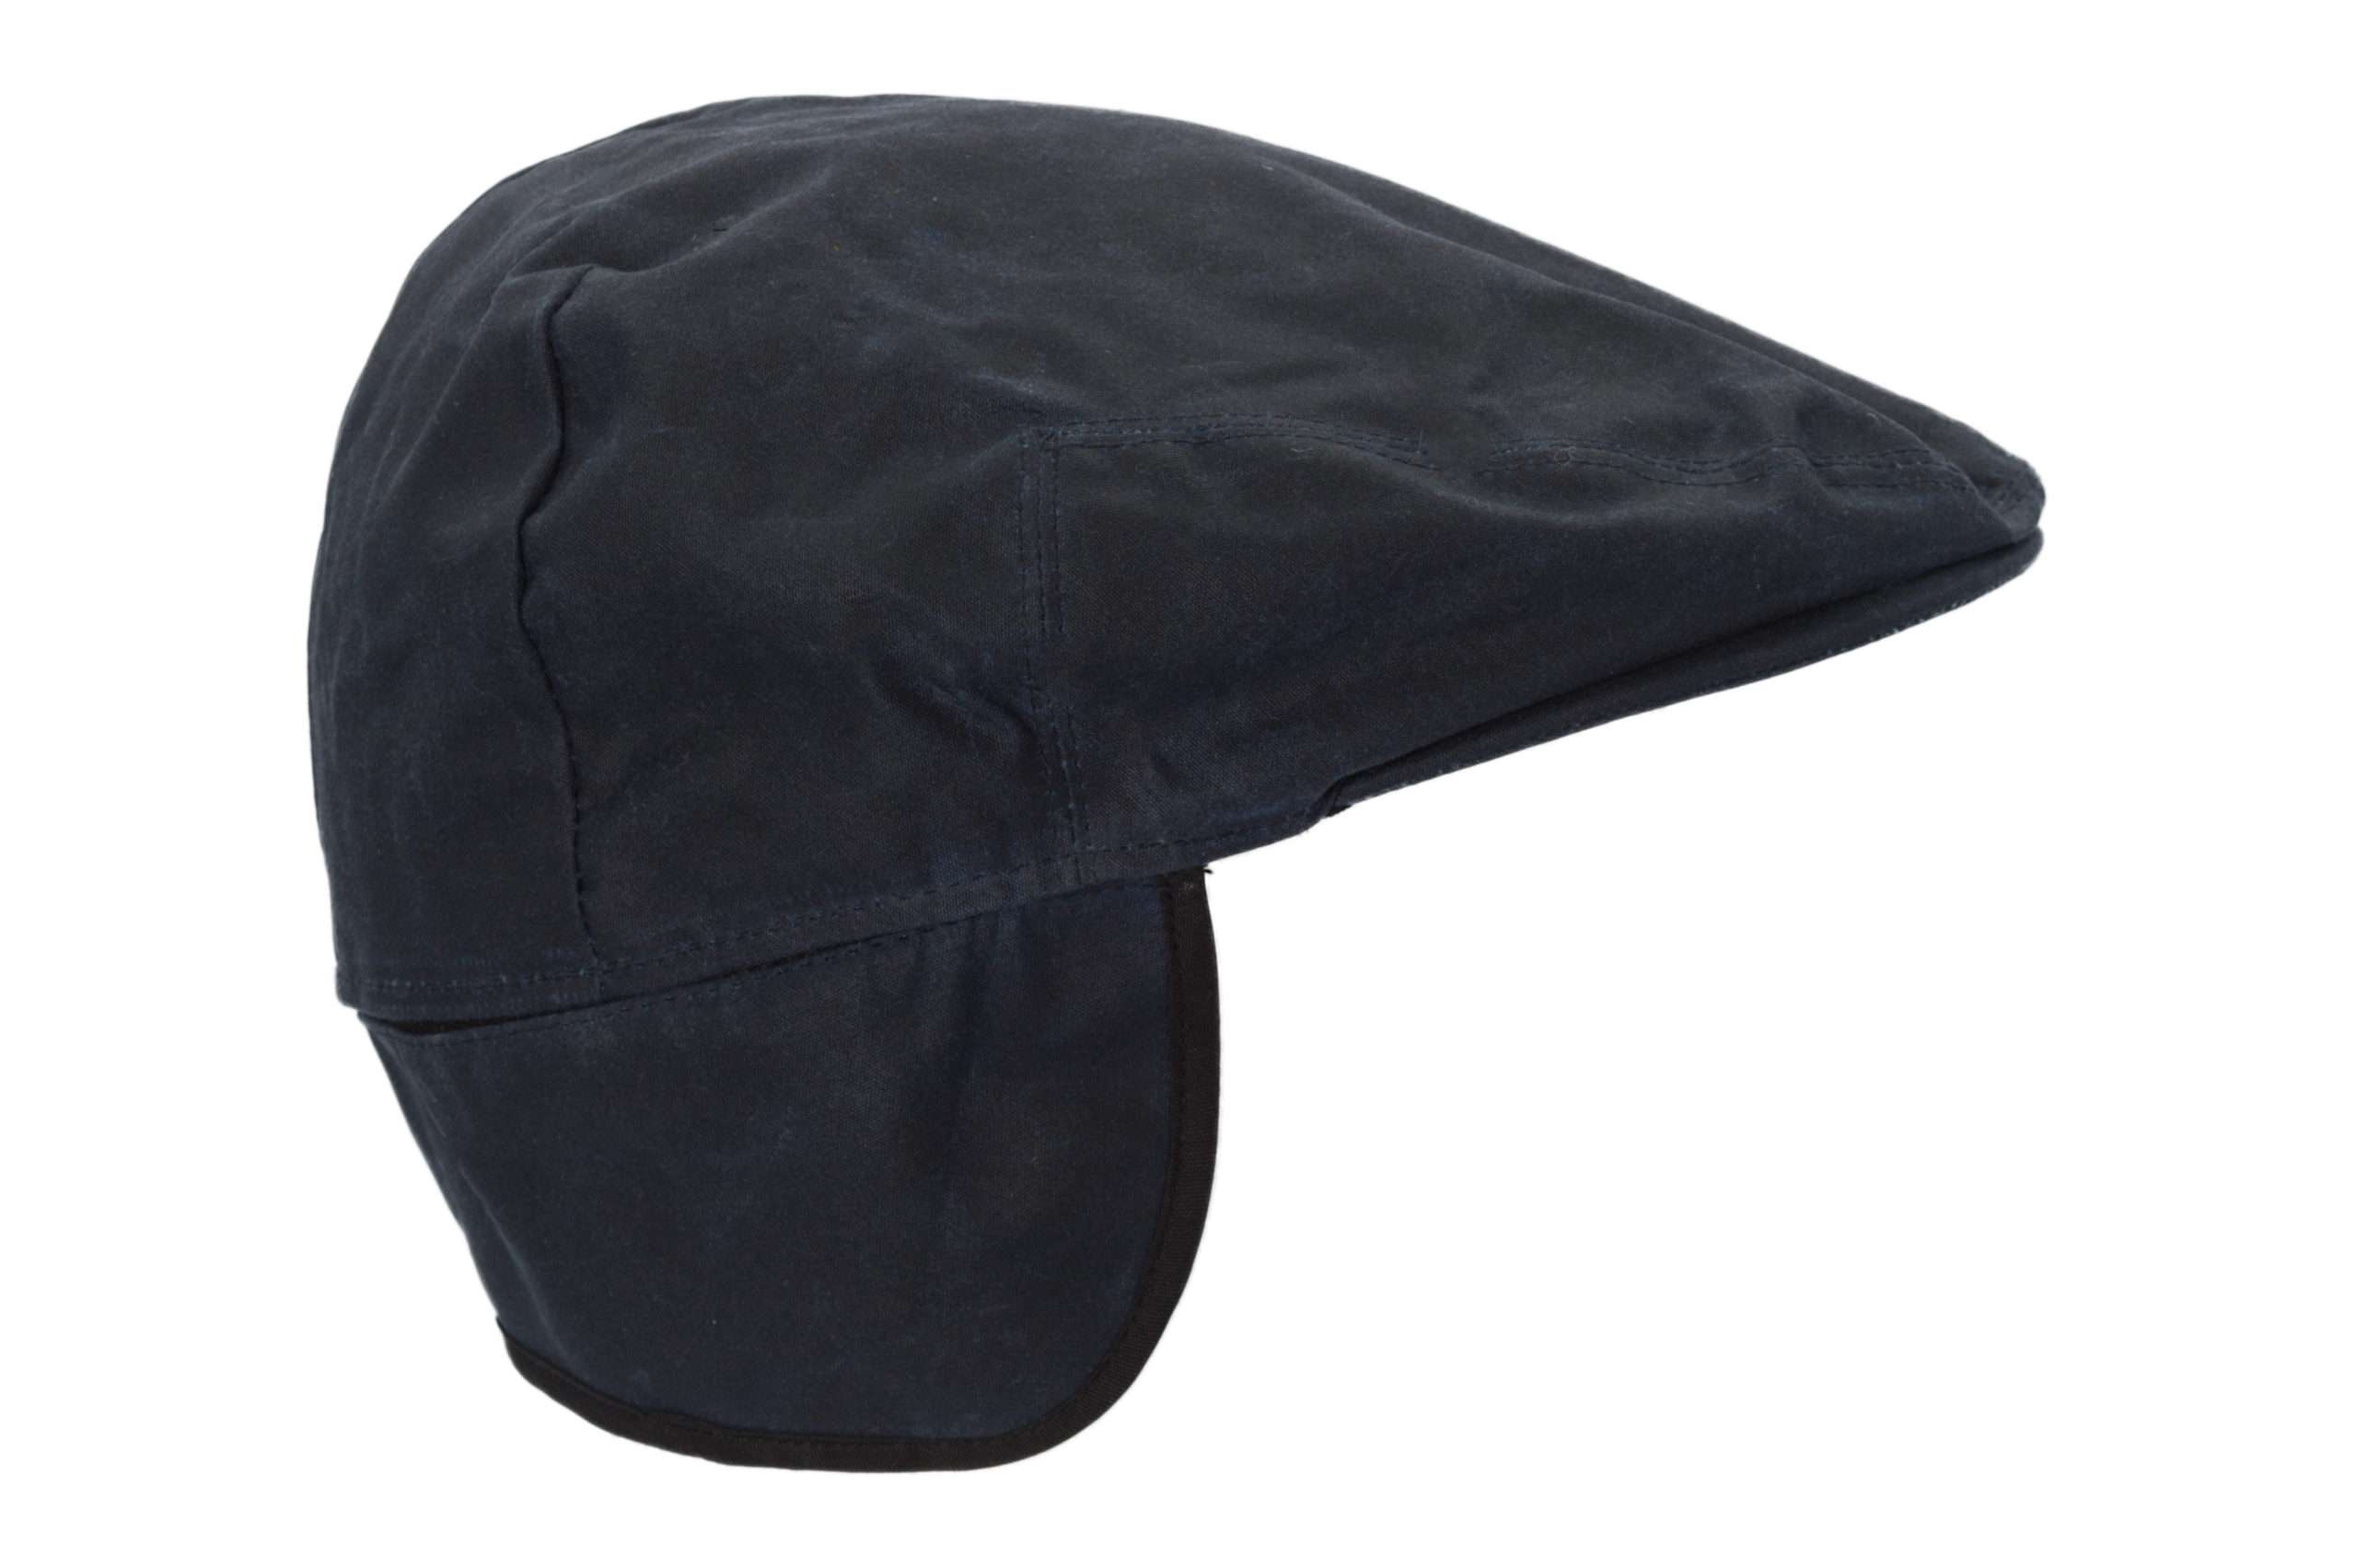 wax trapper navy3 scaled 1 Inner Lining is 100% Black Twill lining, with an inner trim band for extra comfort. Outer jacket (shell) is made from 100% Waxed Antique cotton cloth, making this cap of top quality fabric. Foldable Earflaps: internal Fleece ear flaps can be turned down over the ears and neck for added warmth on chilly days